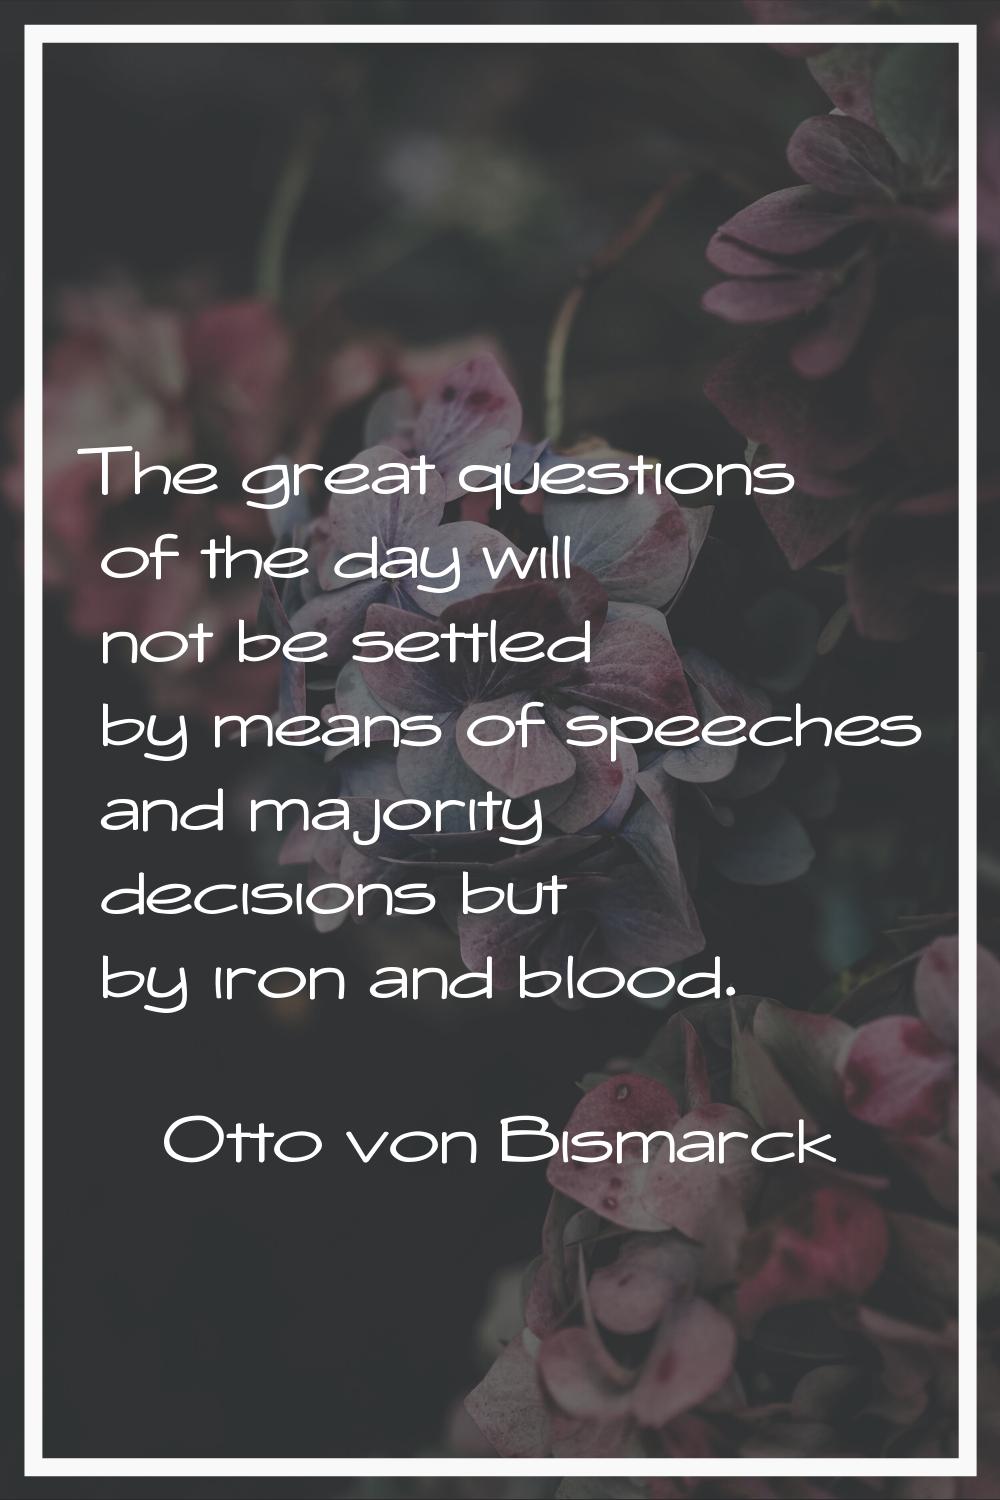 The great questions of the day will not be settled by means of speeches and majority decisions but 